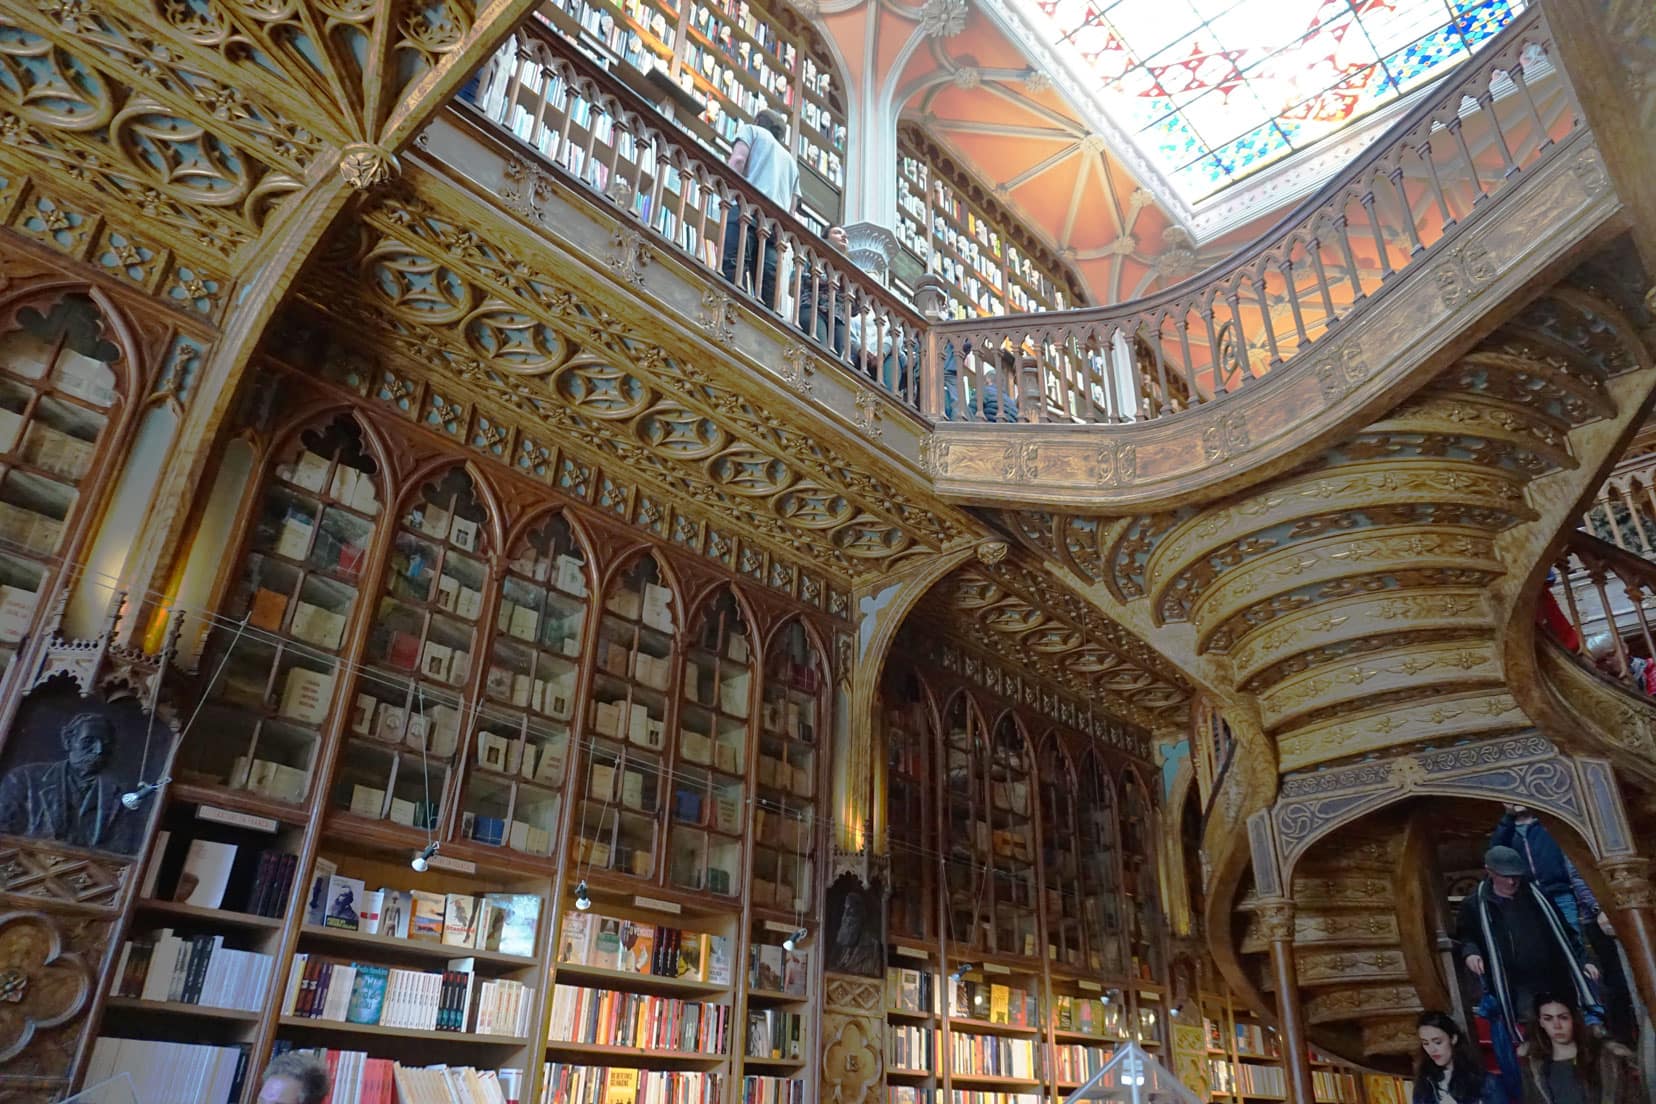 Wooden intricately desgned and carved book shelves with floor to ceiling books and two stories Book shop 